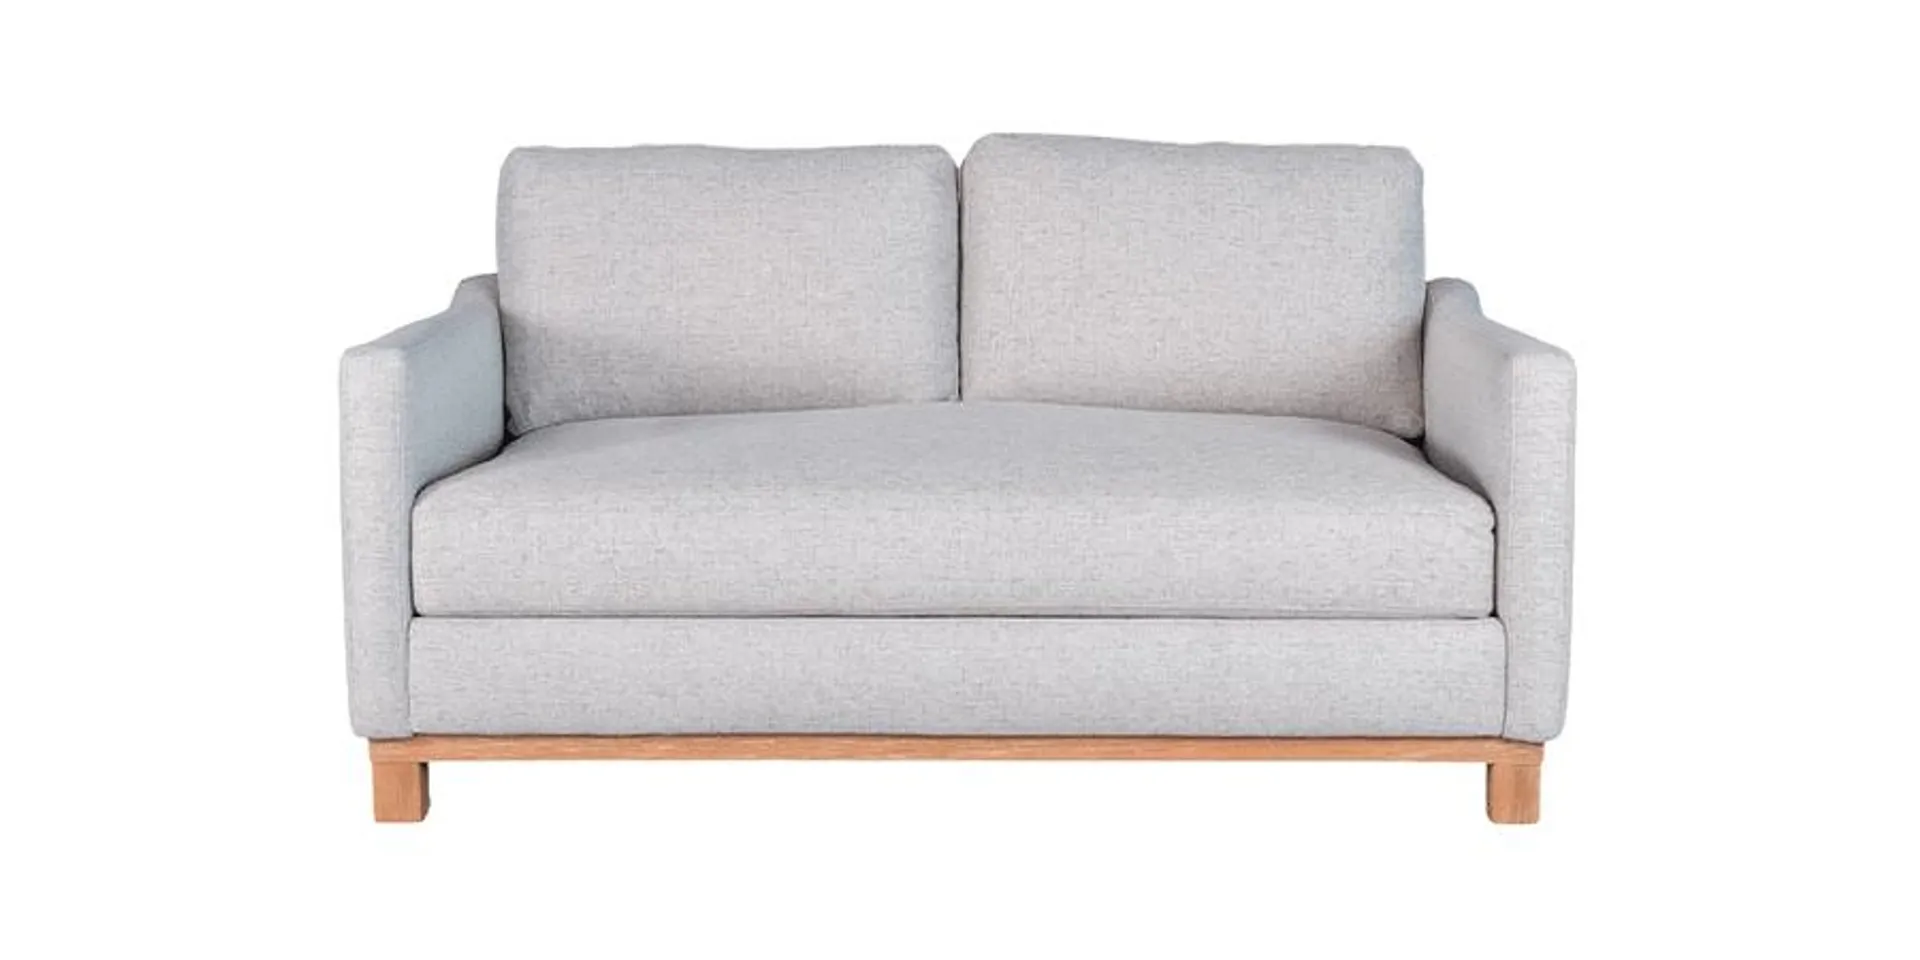 St Clair 2 Seater Sofa in Fabric